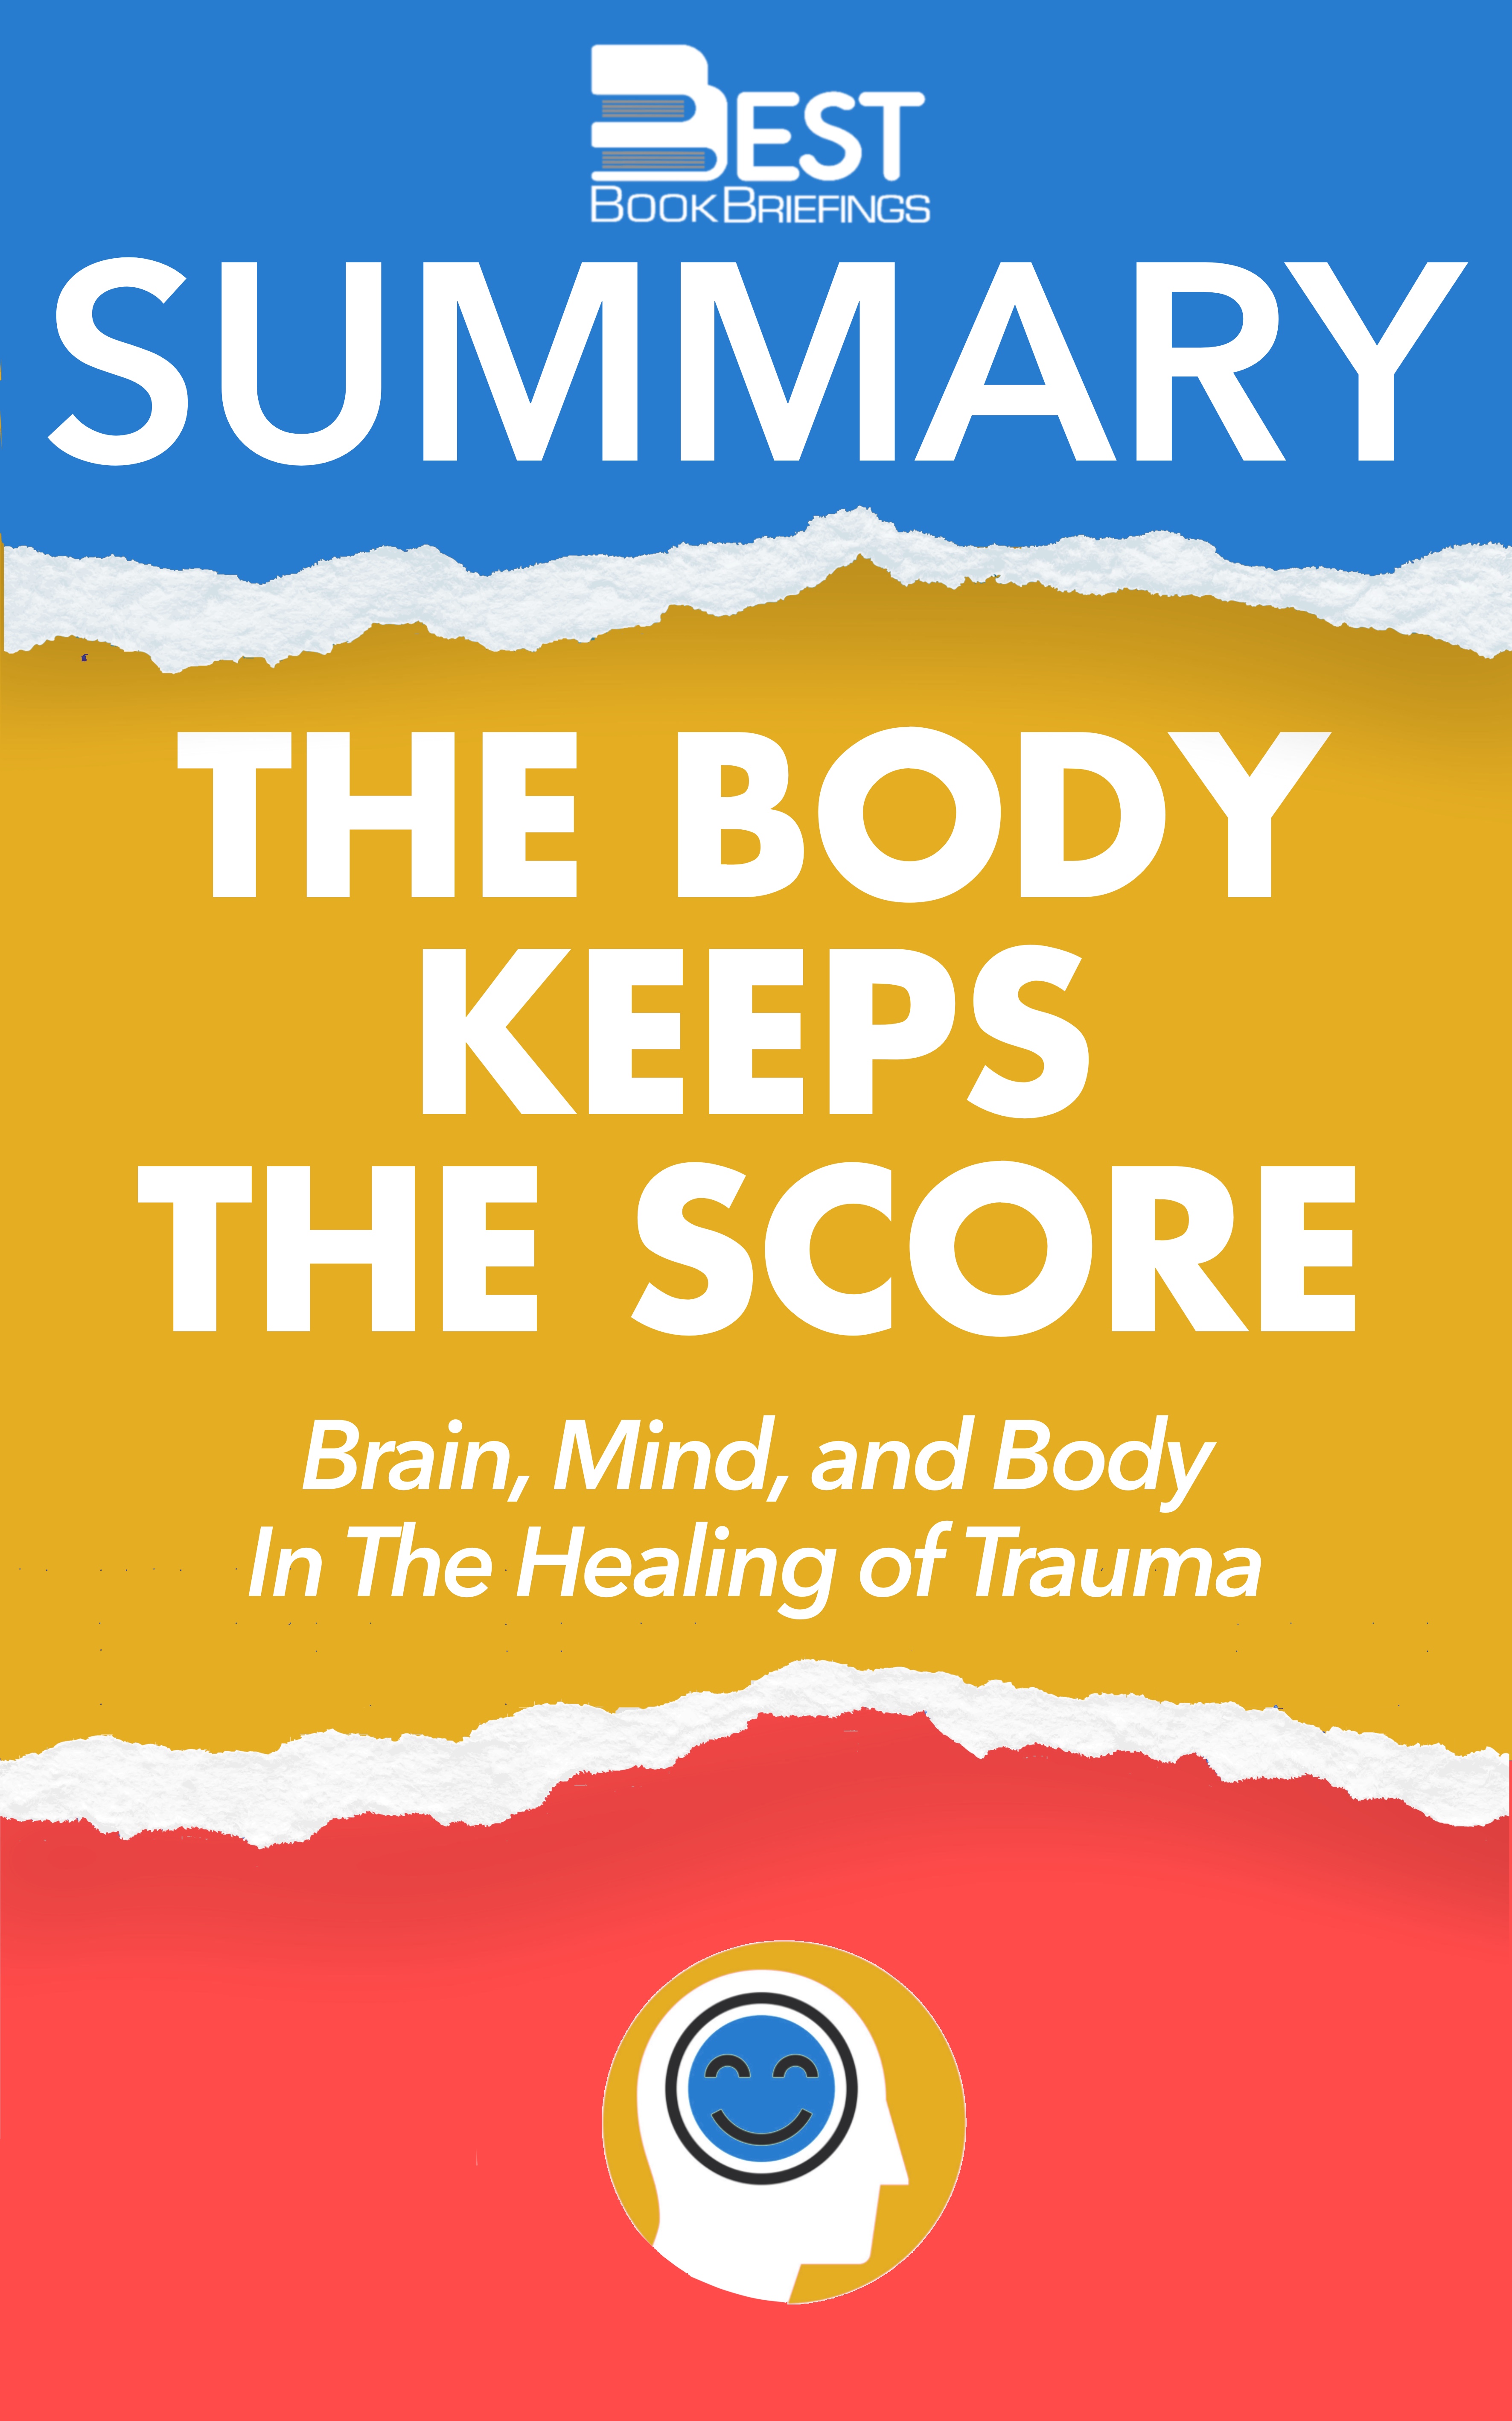 Trauma is a fact of life. Veterans and their families deal with the painful aftermath of combat; one in five Americans has been molested; one in four grew up with alcoholics; one in three couples have engaged in physical violence. Dr. Bessel van der Kolk, one of the world’s foremost experts 